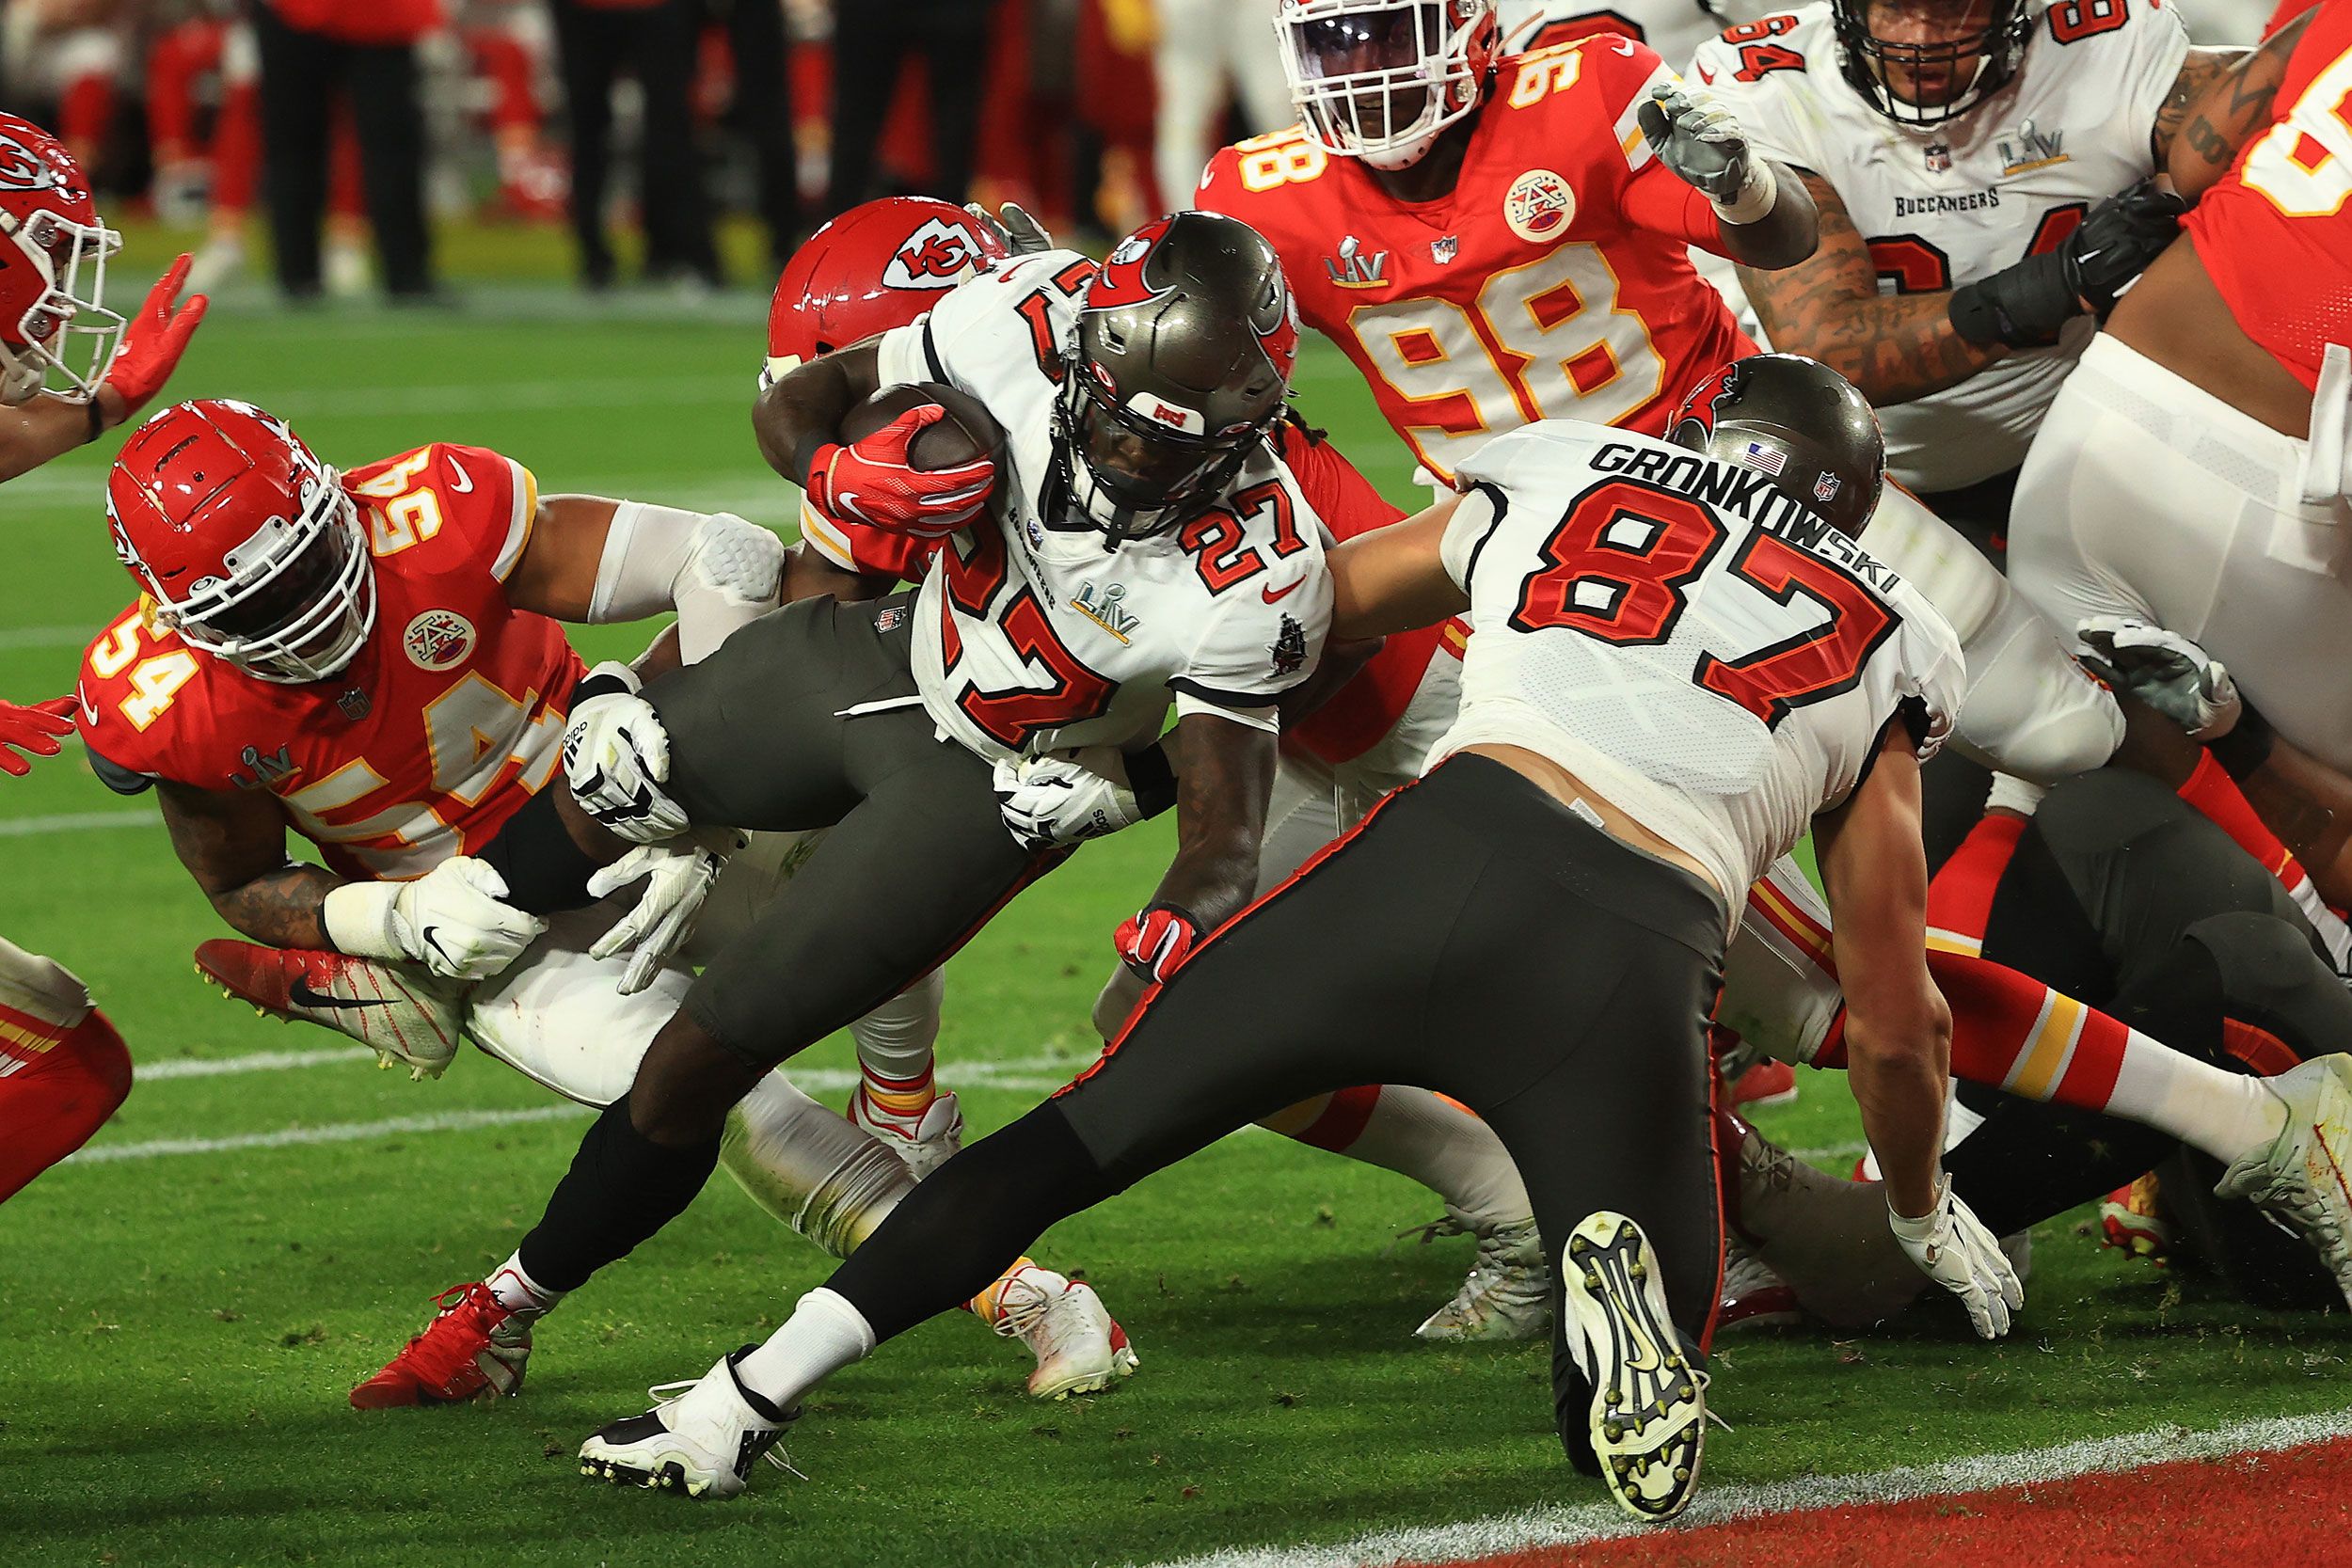 Buccaneers make history as first team to win Super Bowl at home